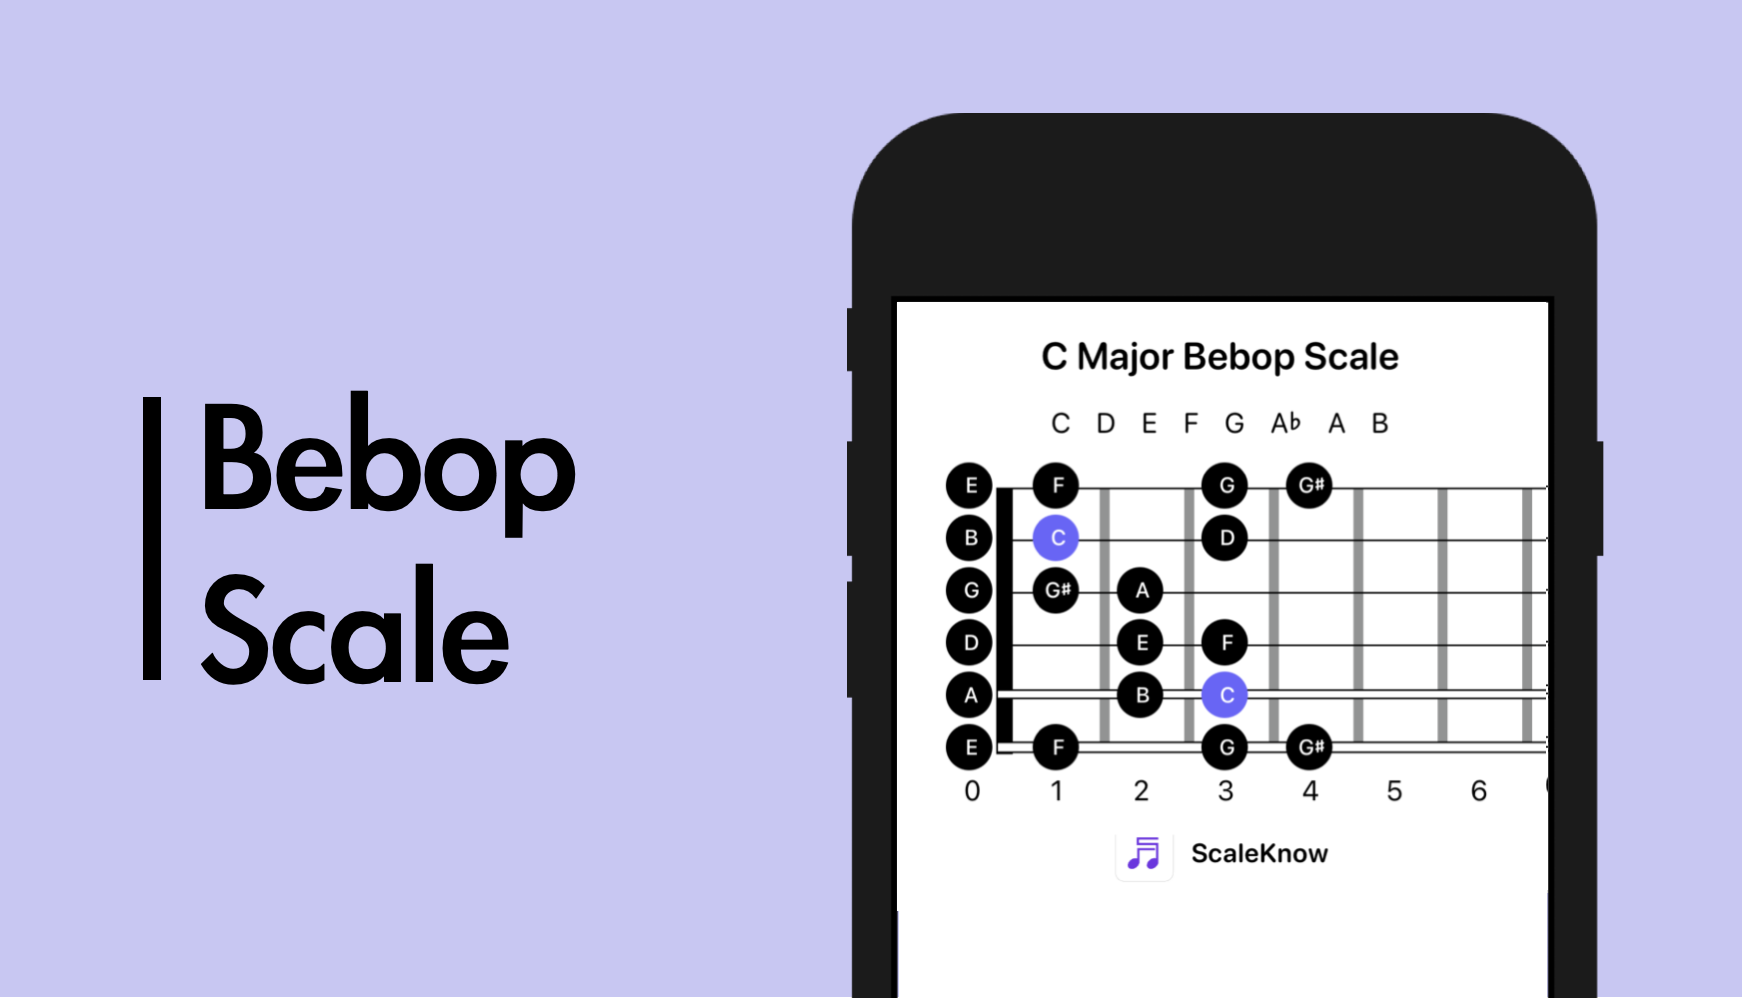 The Bebop Scale: A Guide for Improvisational Musicians